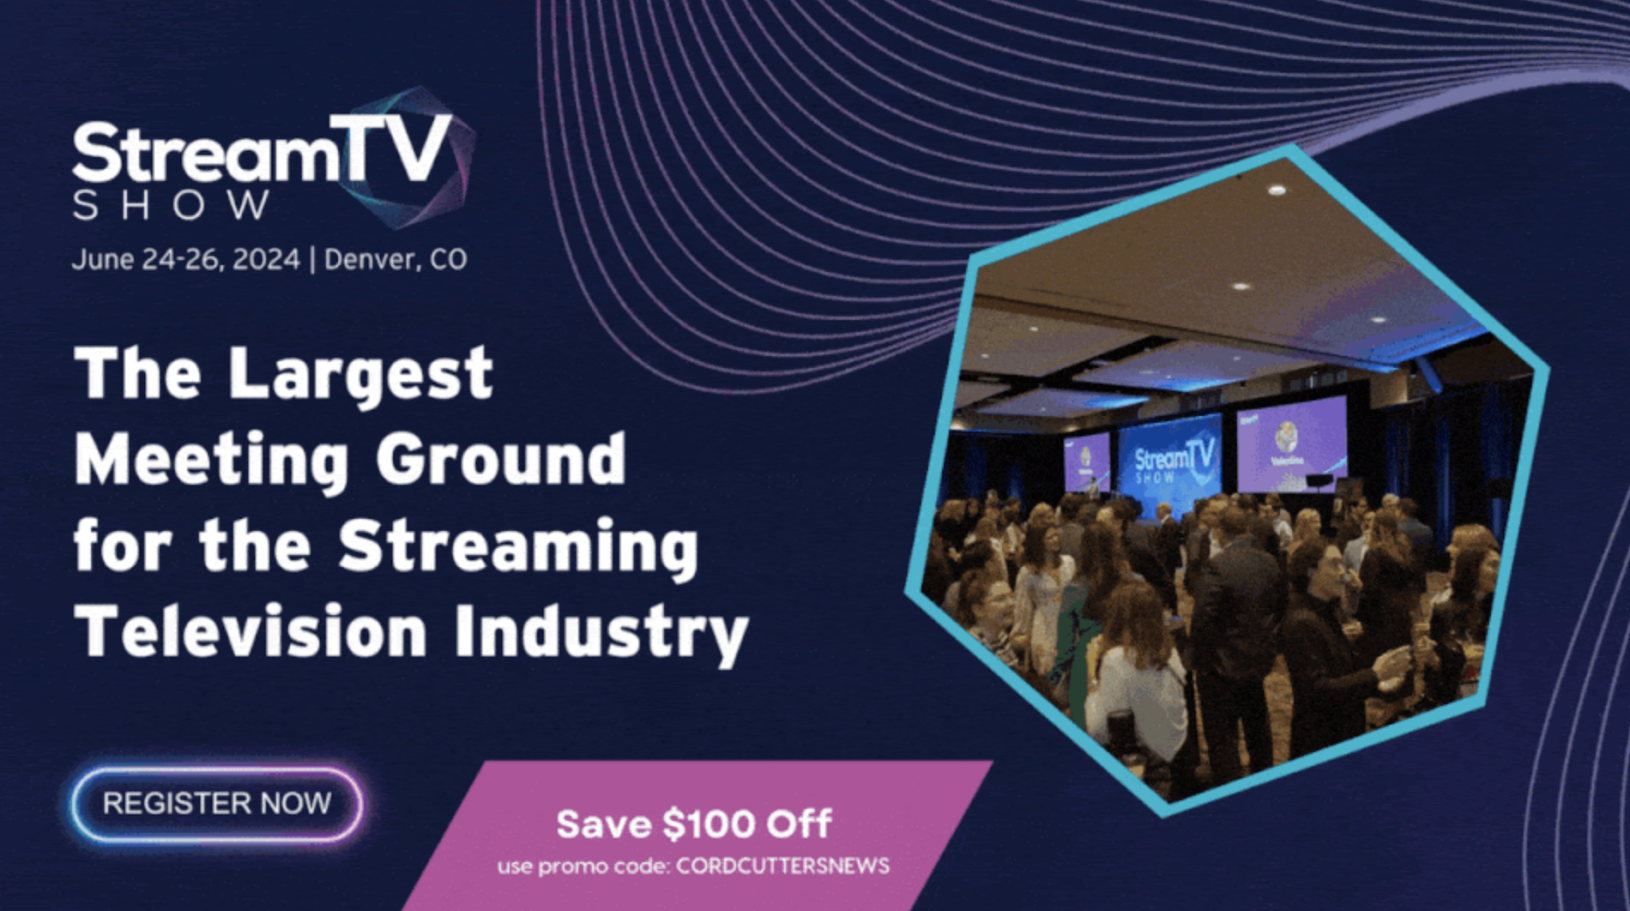 Sponsored: Cord Cutters News Is Partnering With the StreamTV Show